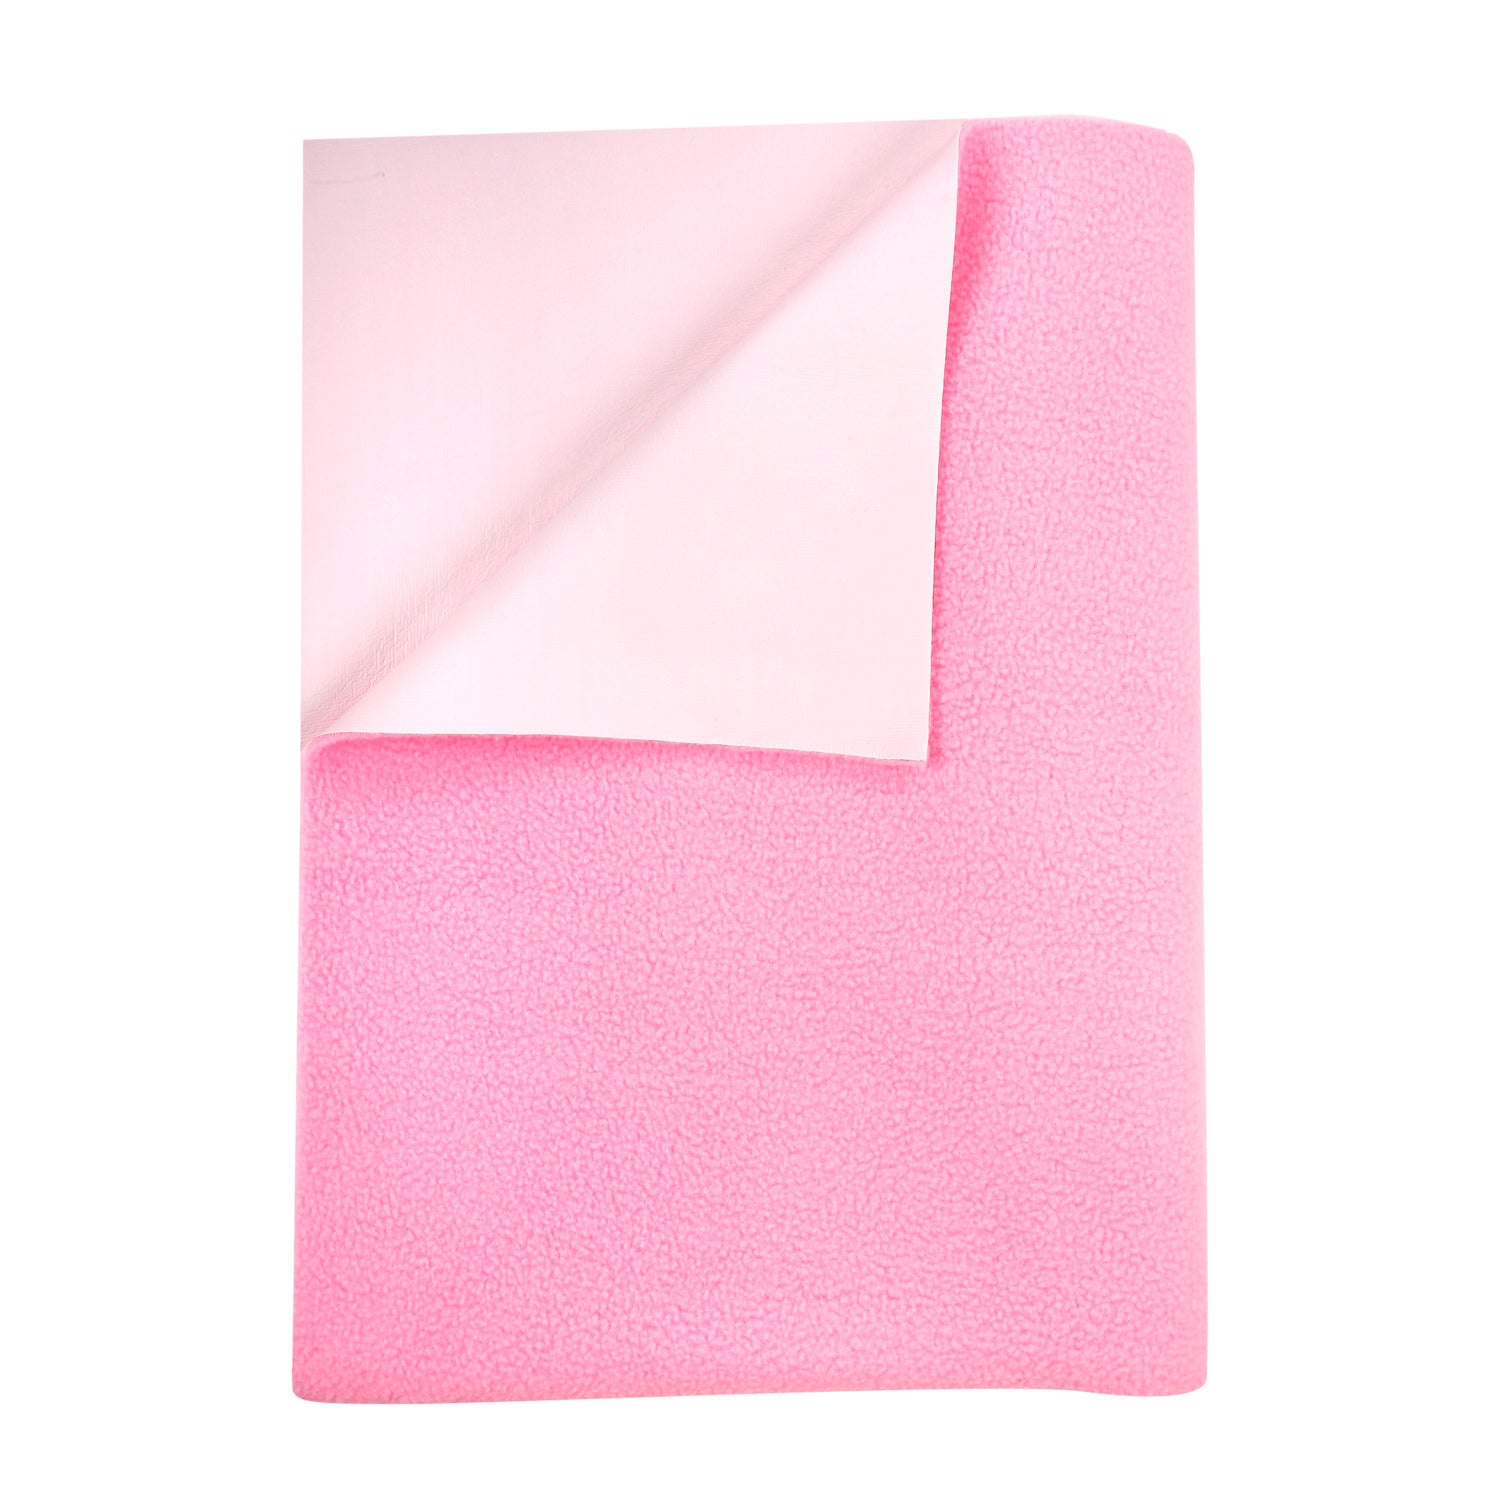 Plain Pink Water-Resistant Bed Protector - 3 Sizes